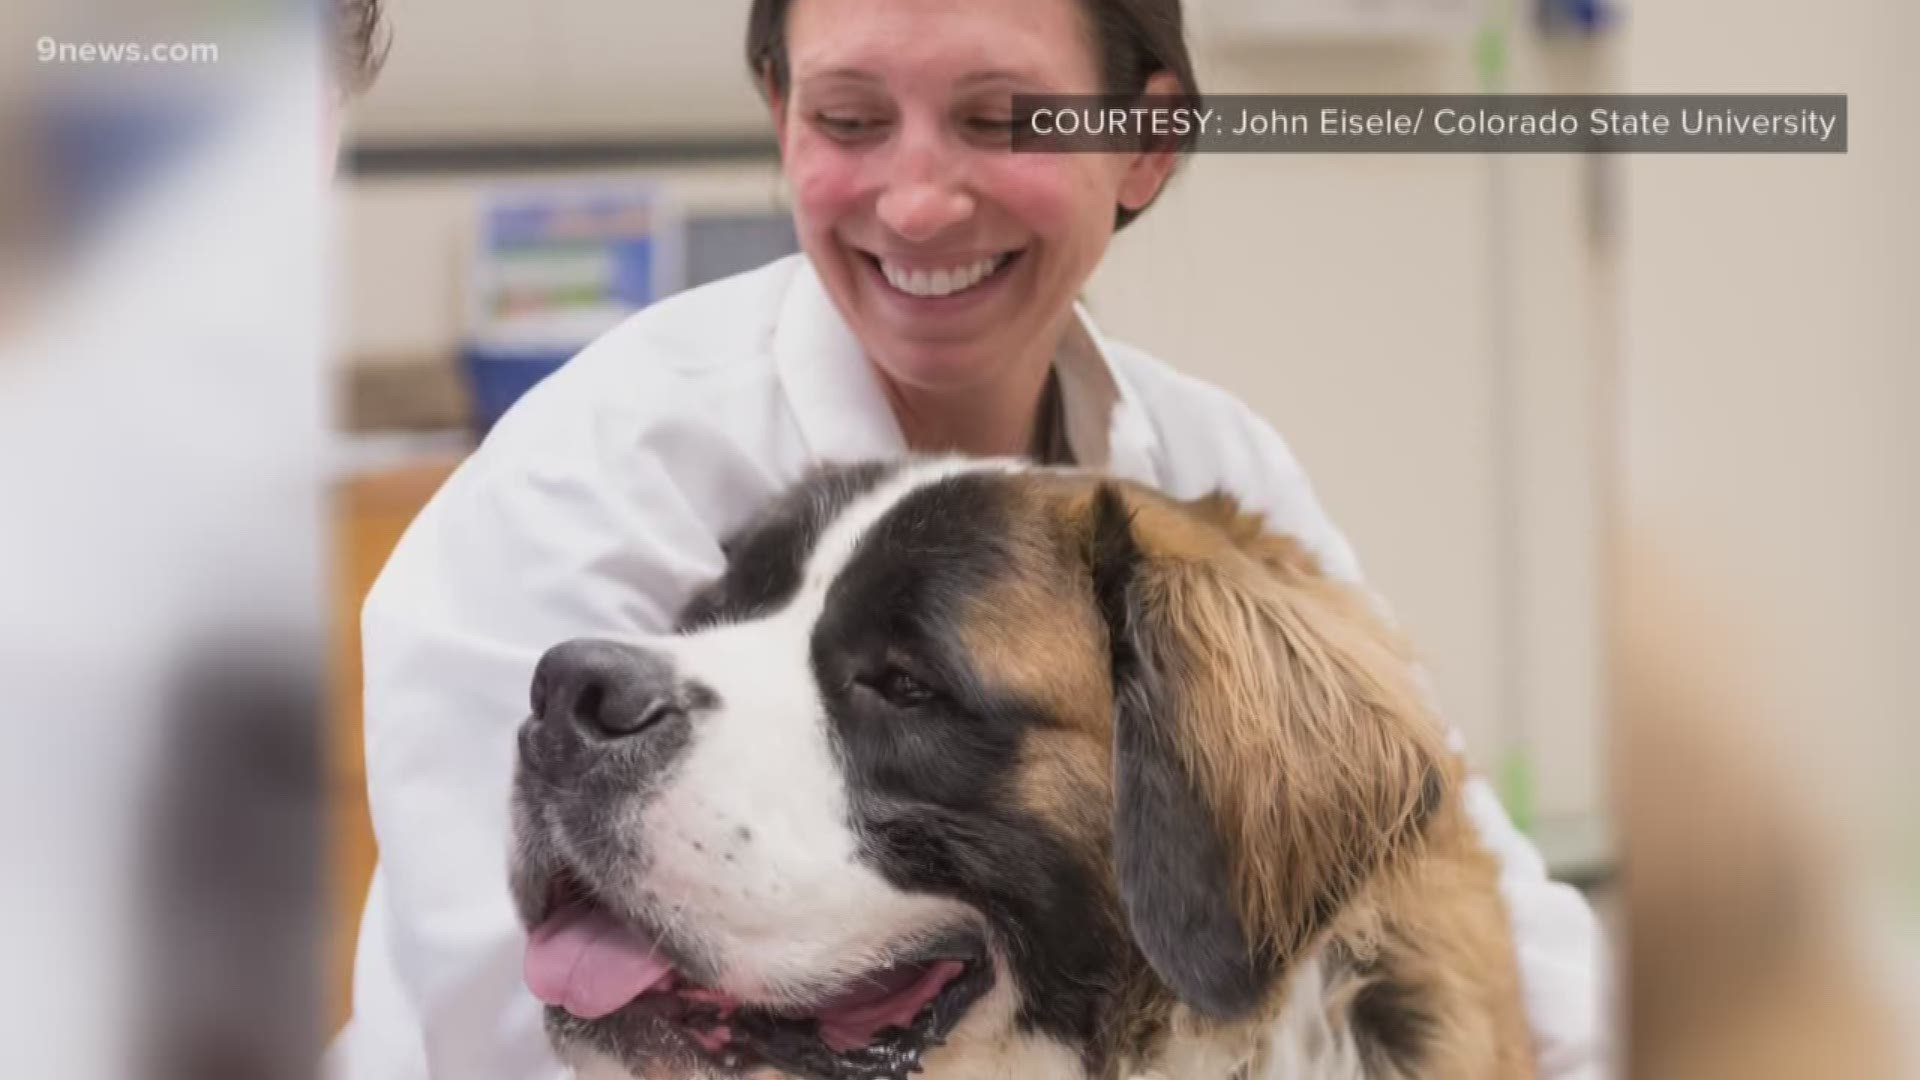 CSU is researching CBD effects on dogs